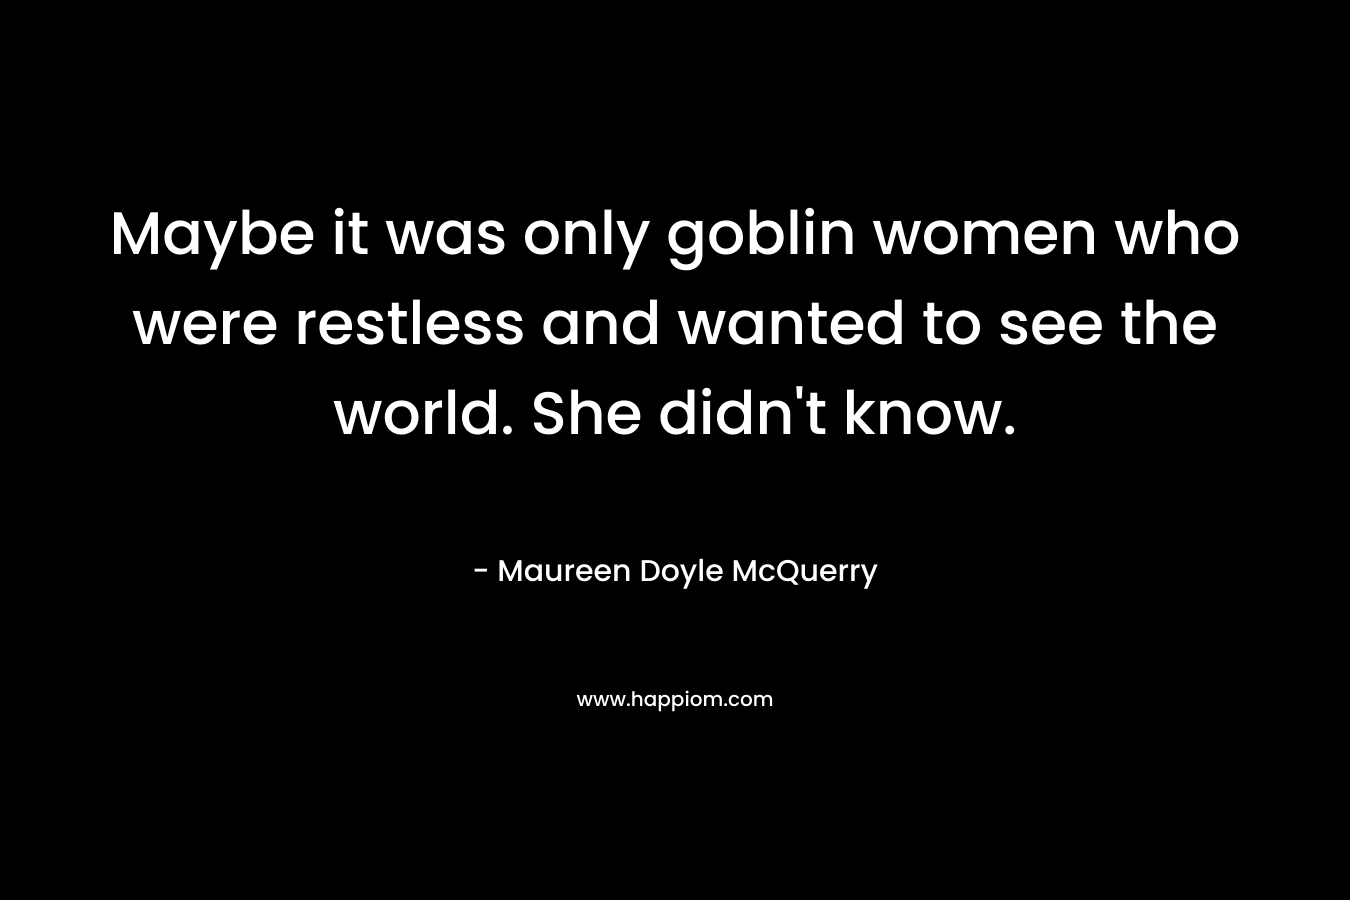 Maybe it was only goblin women who were restless and wanted to see the world. She didn't know.